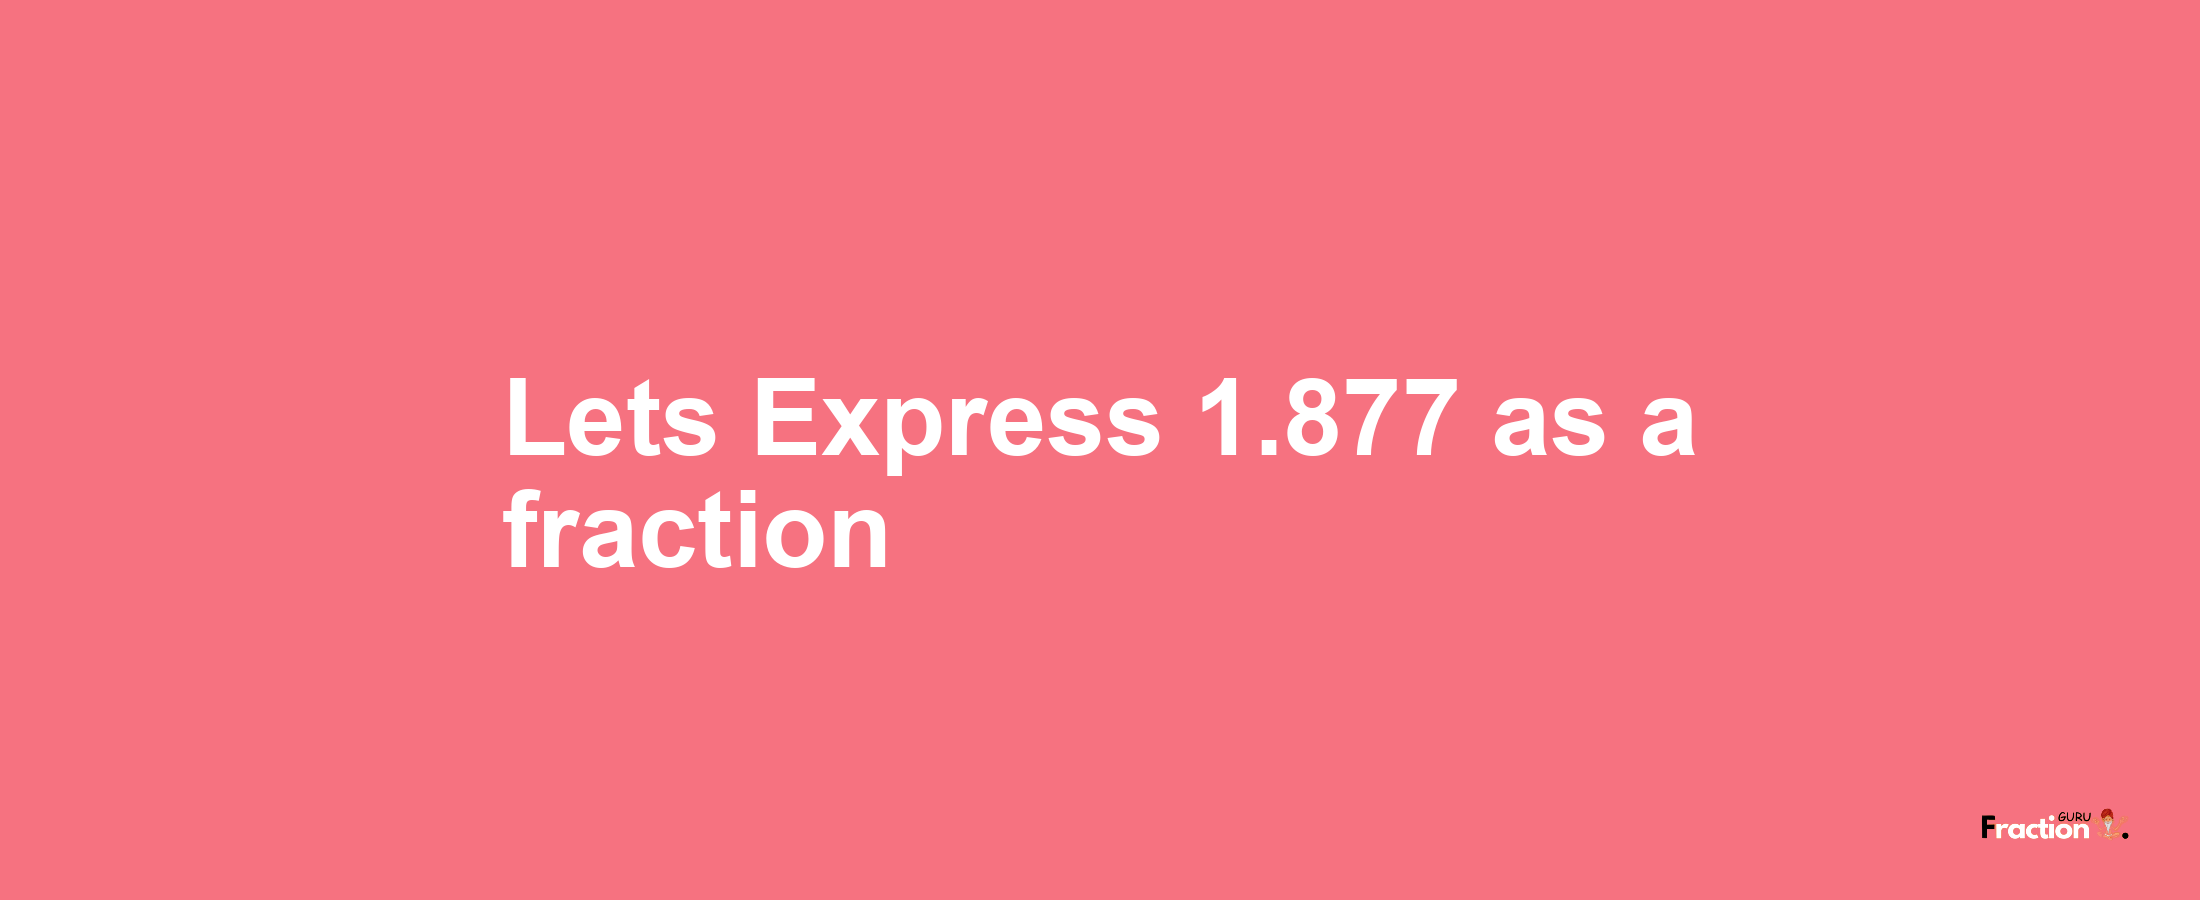 Lets Express 1.877 as afraction